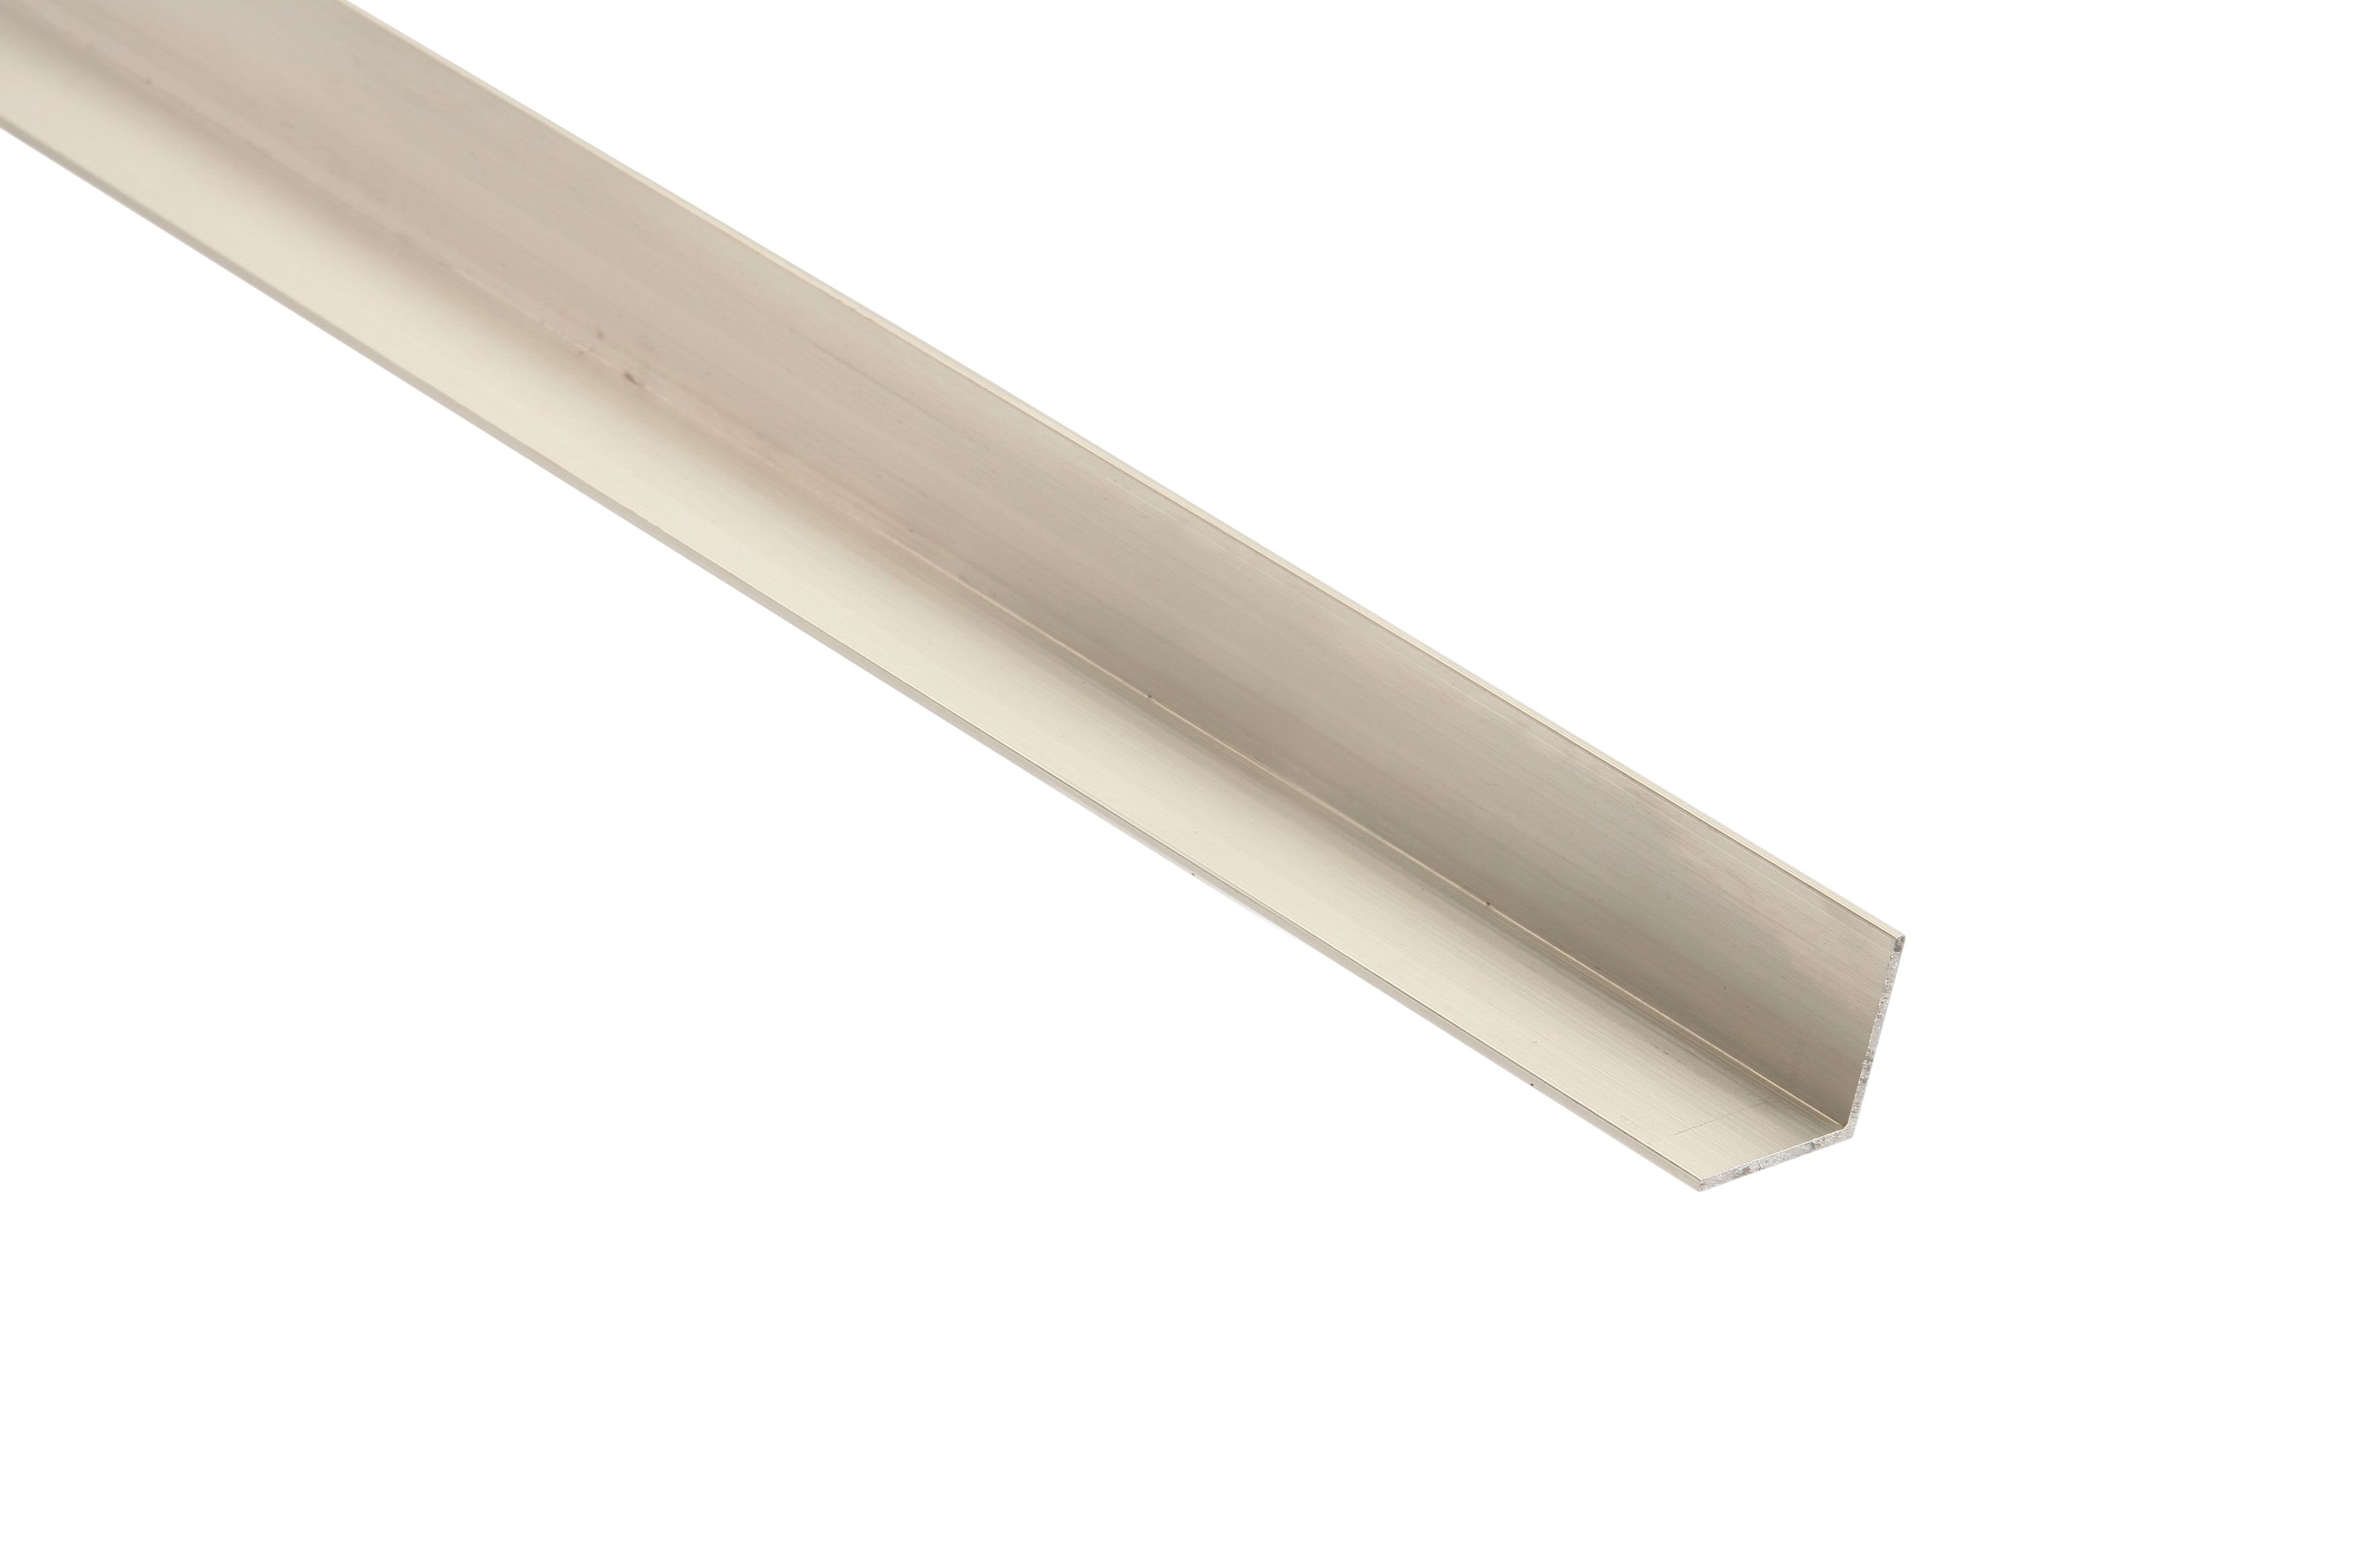 Image of Wickes Aluminium Angle Moulding - 18 x 18 x 2400mm